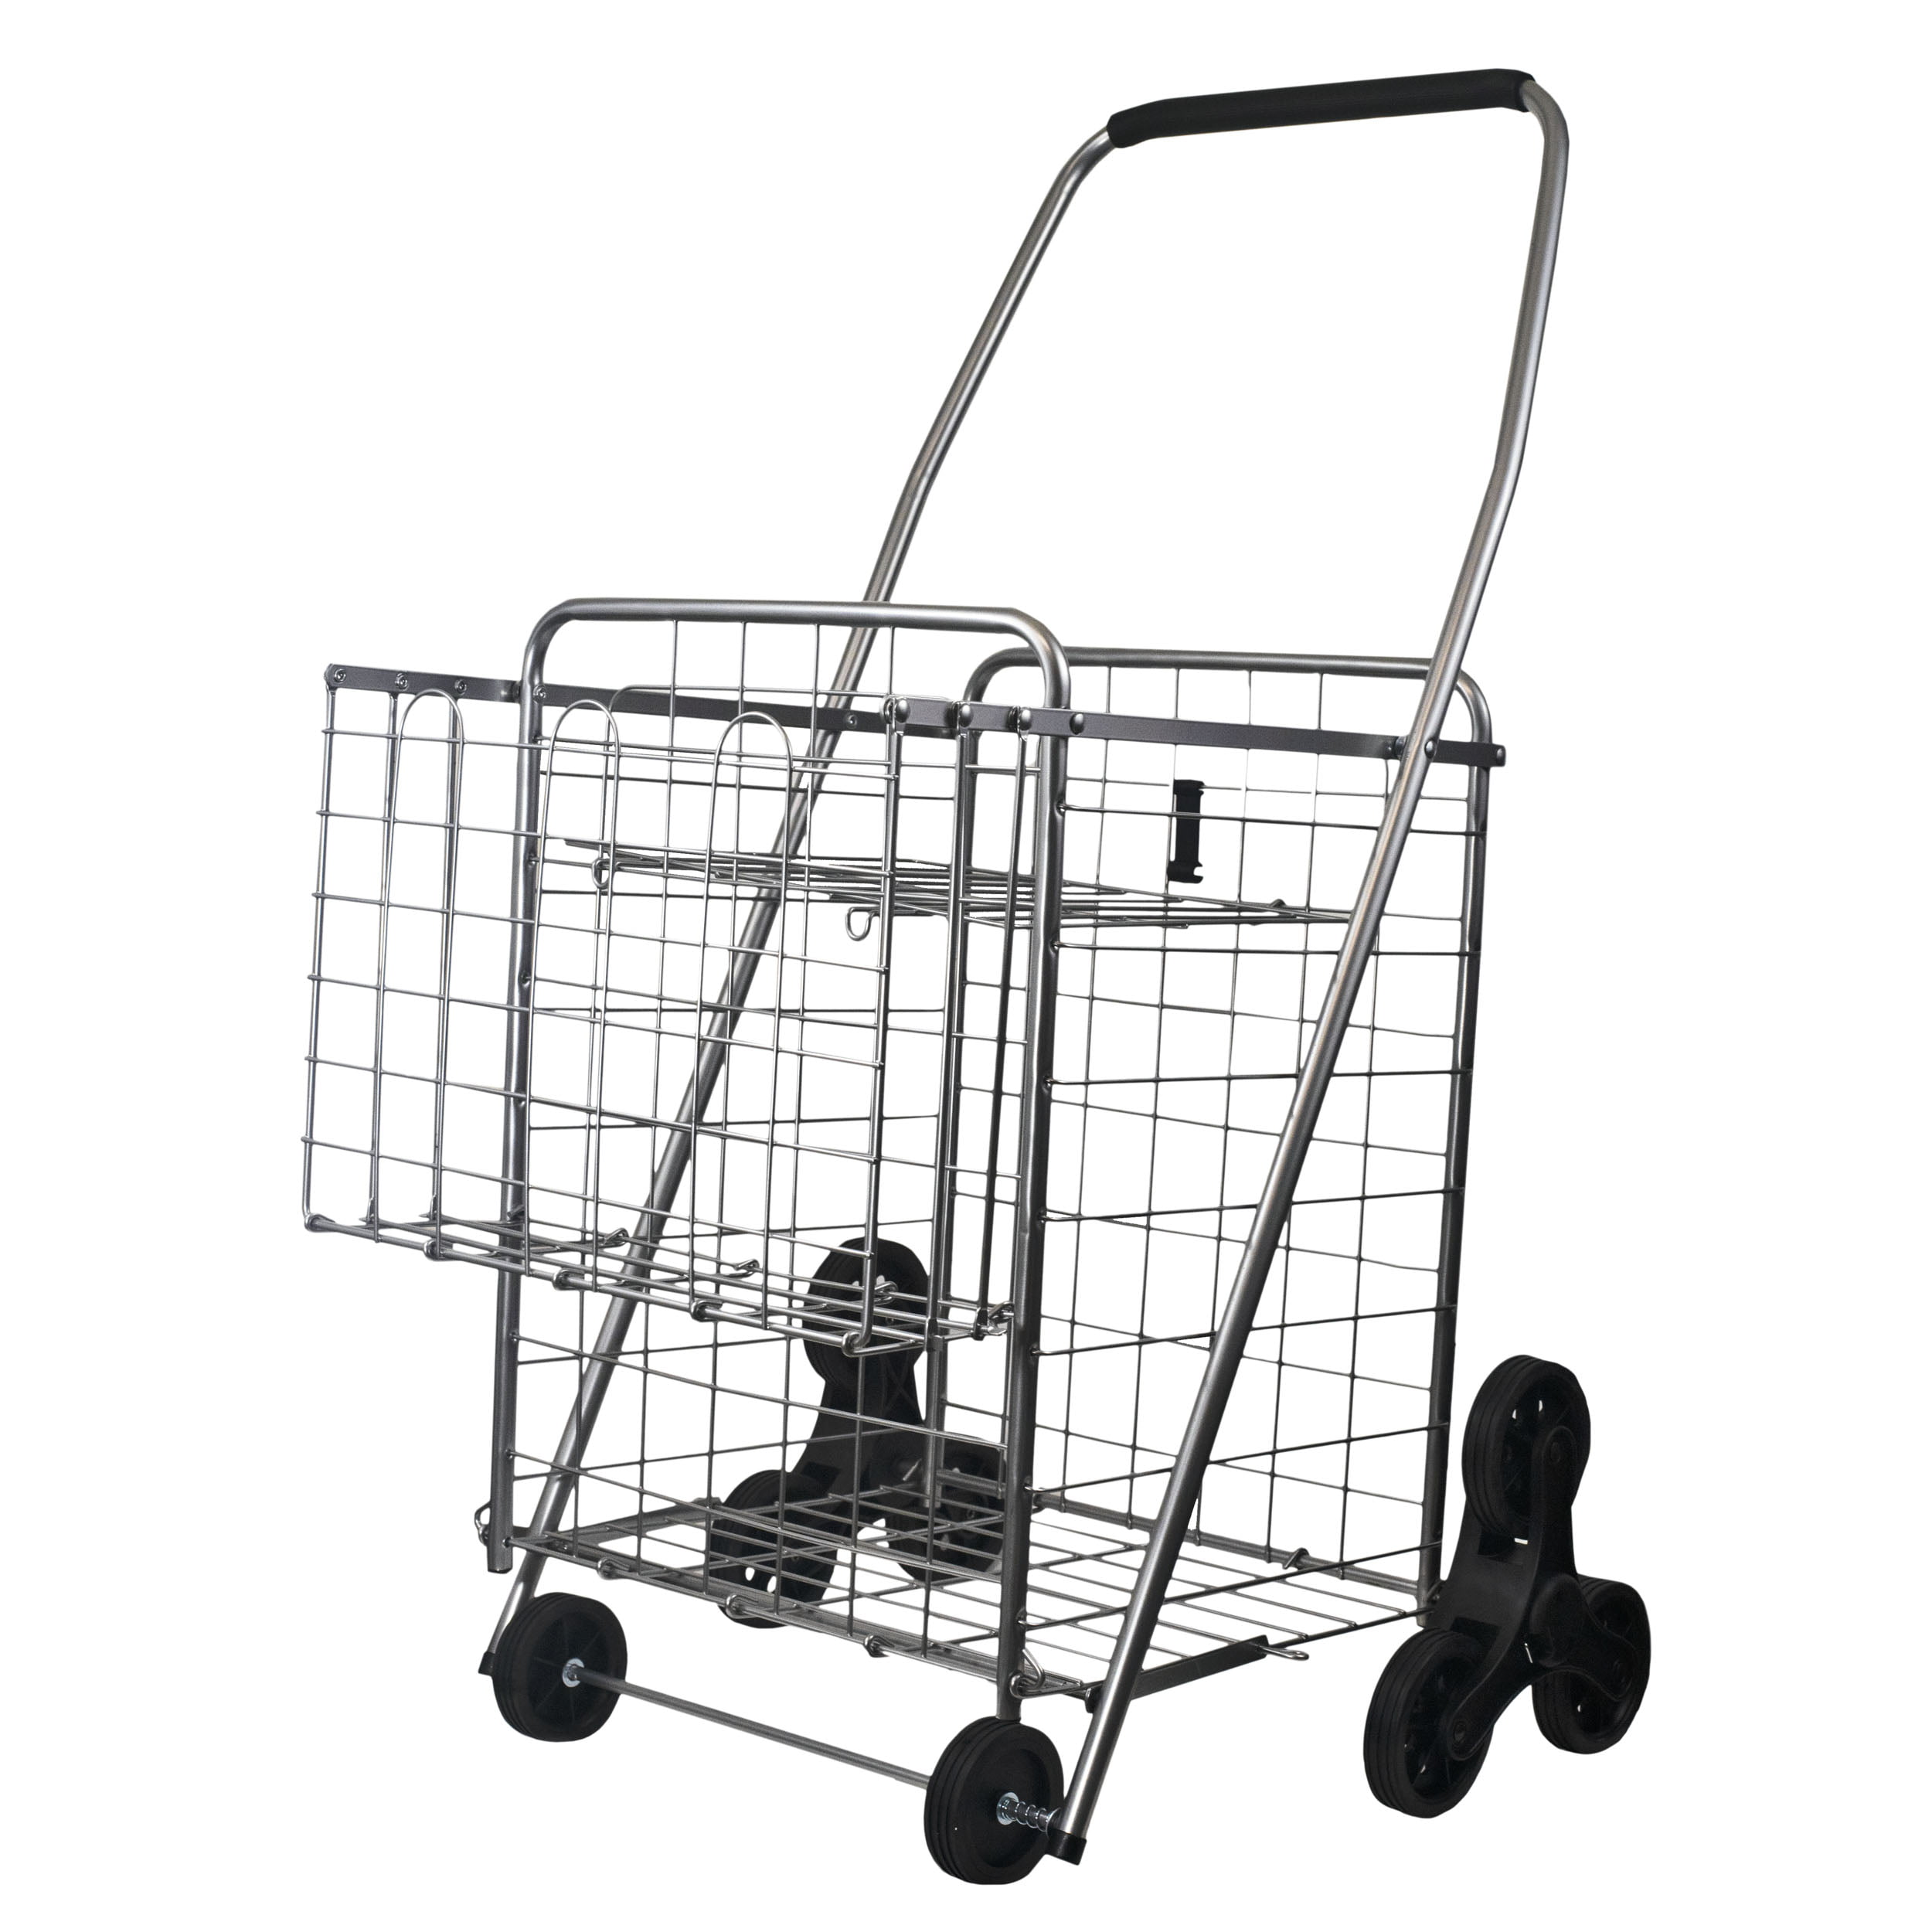 ChenDz-S Shopping cart loading cart small pull cart home trolley car trolley climbing stairs folding portable pull cart trailer 